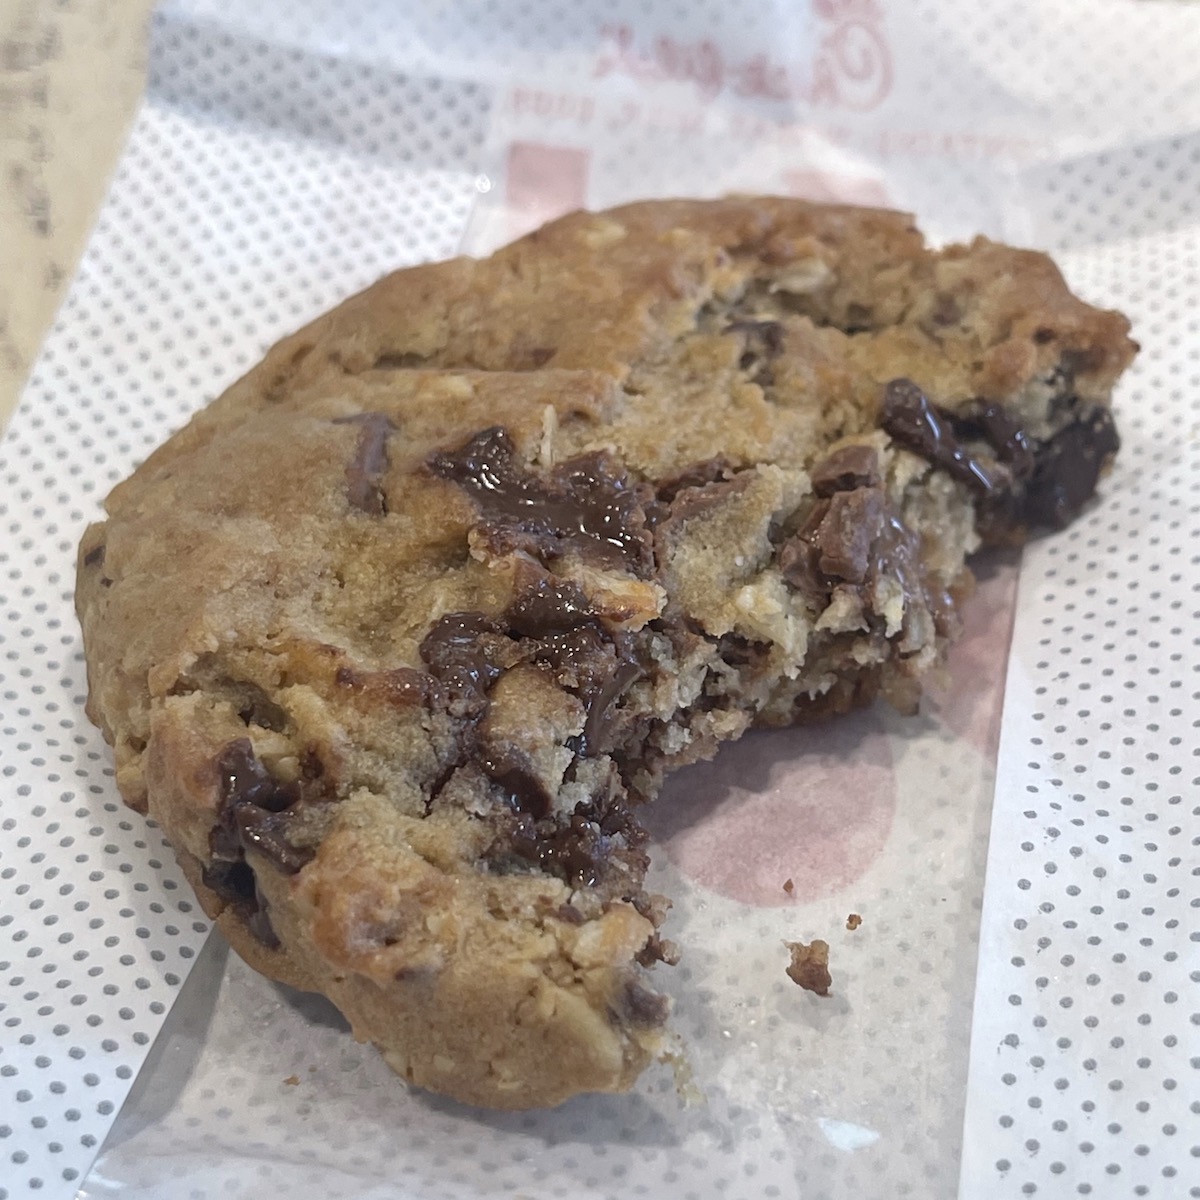 Chocolate Chunk Cookie from Chick-fil-A in Hialeah, Florida